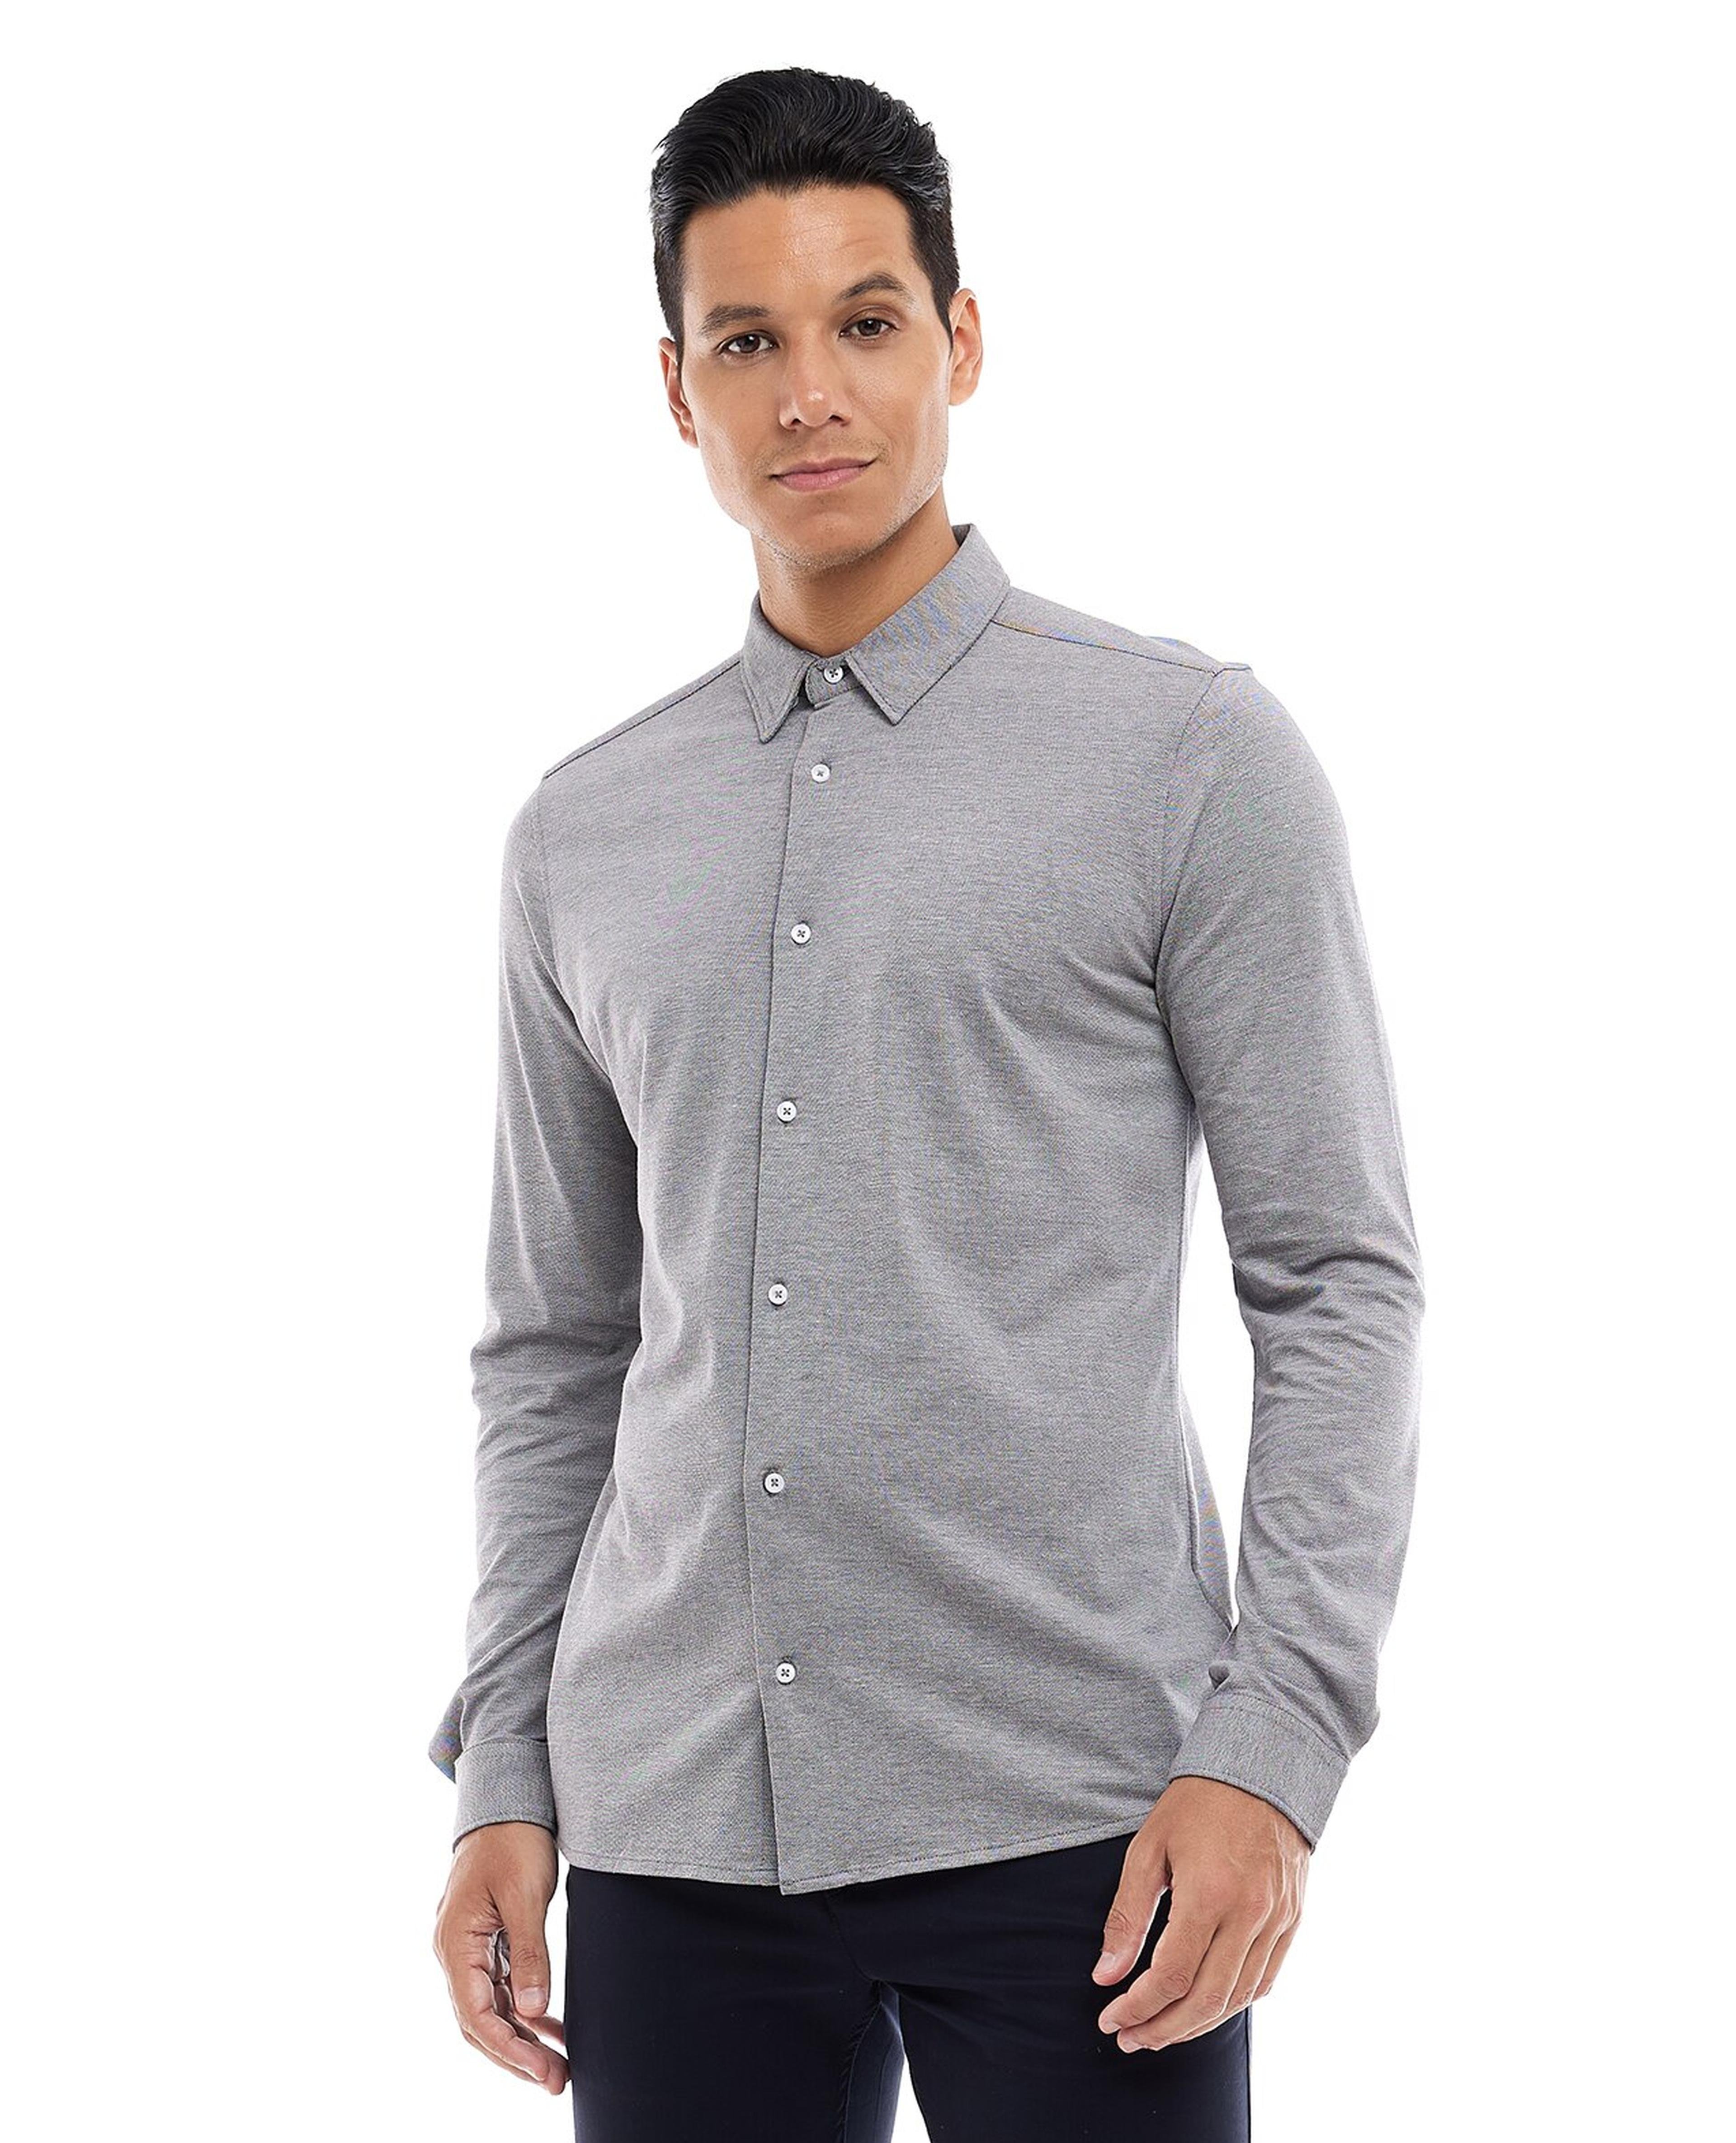 Solid Knit Shirt with Classic Collar and Long Sleeves